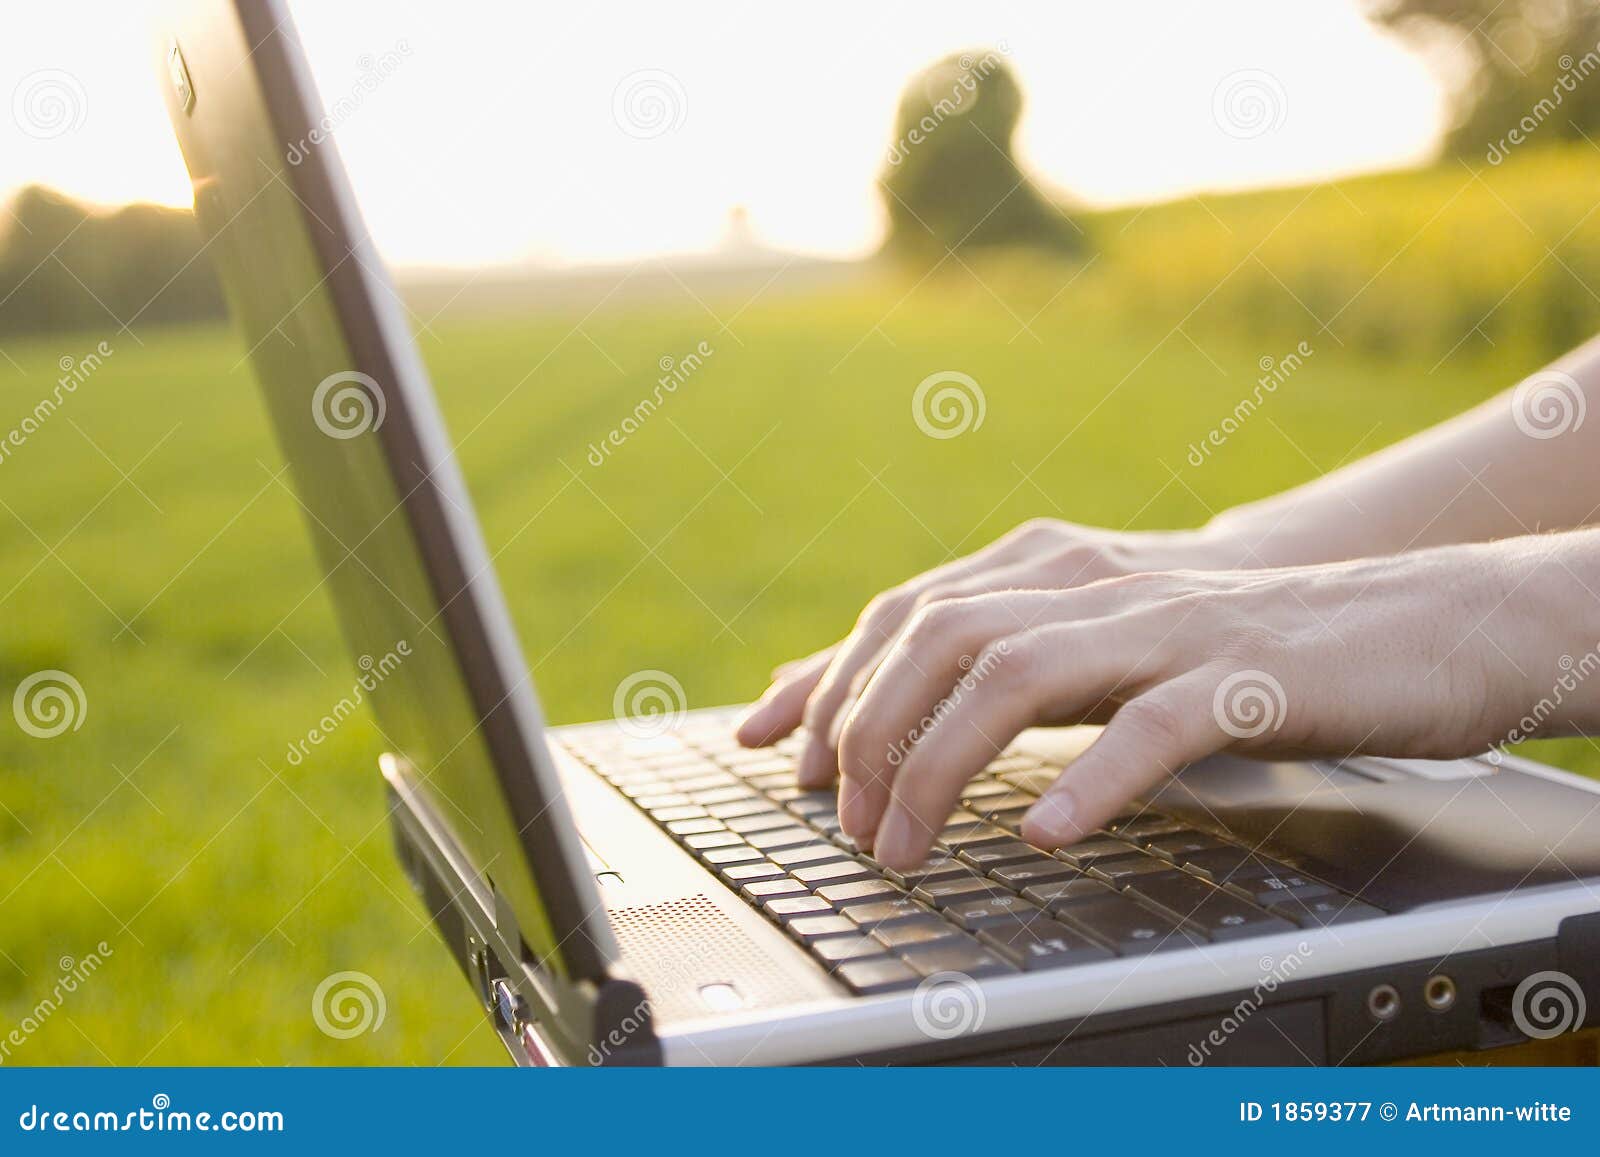 typing on a laptop outside